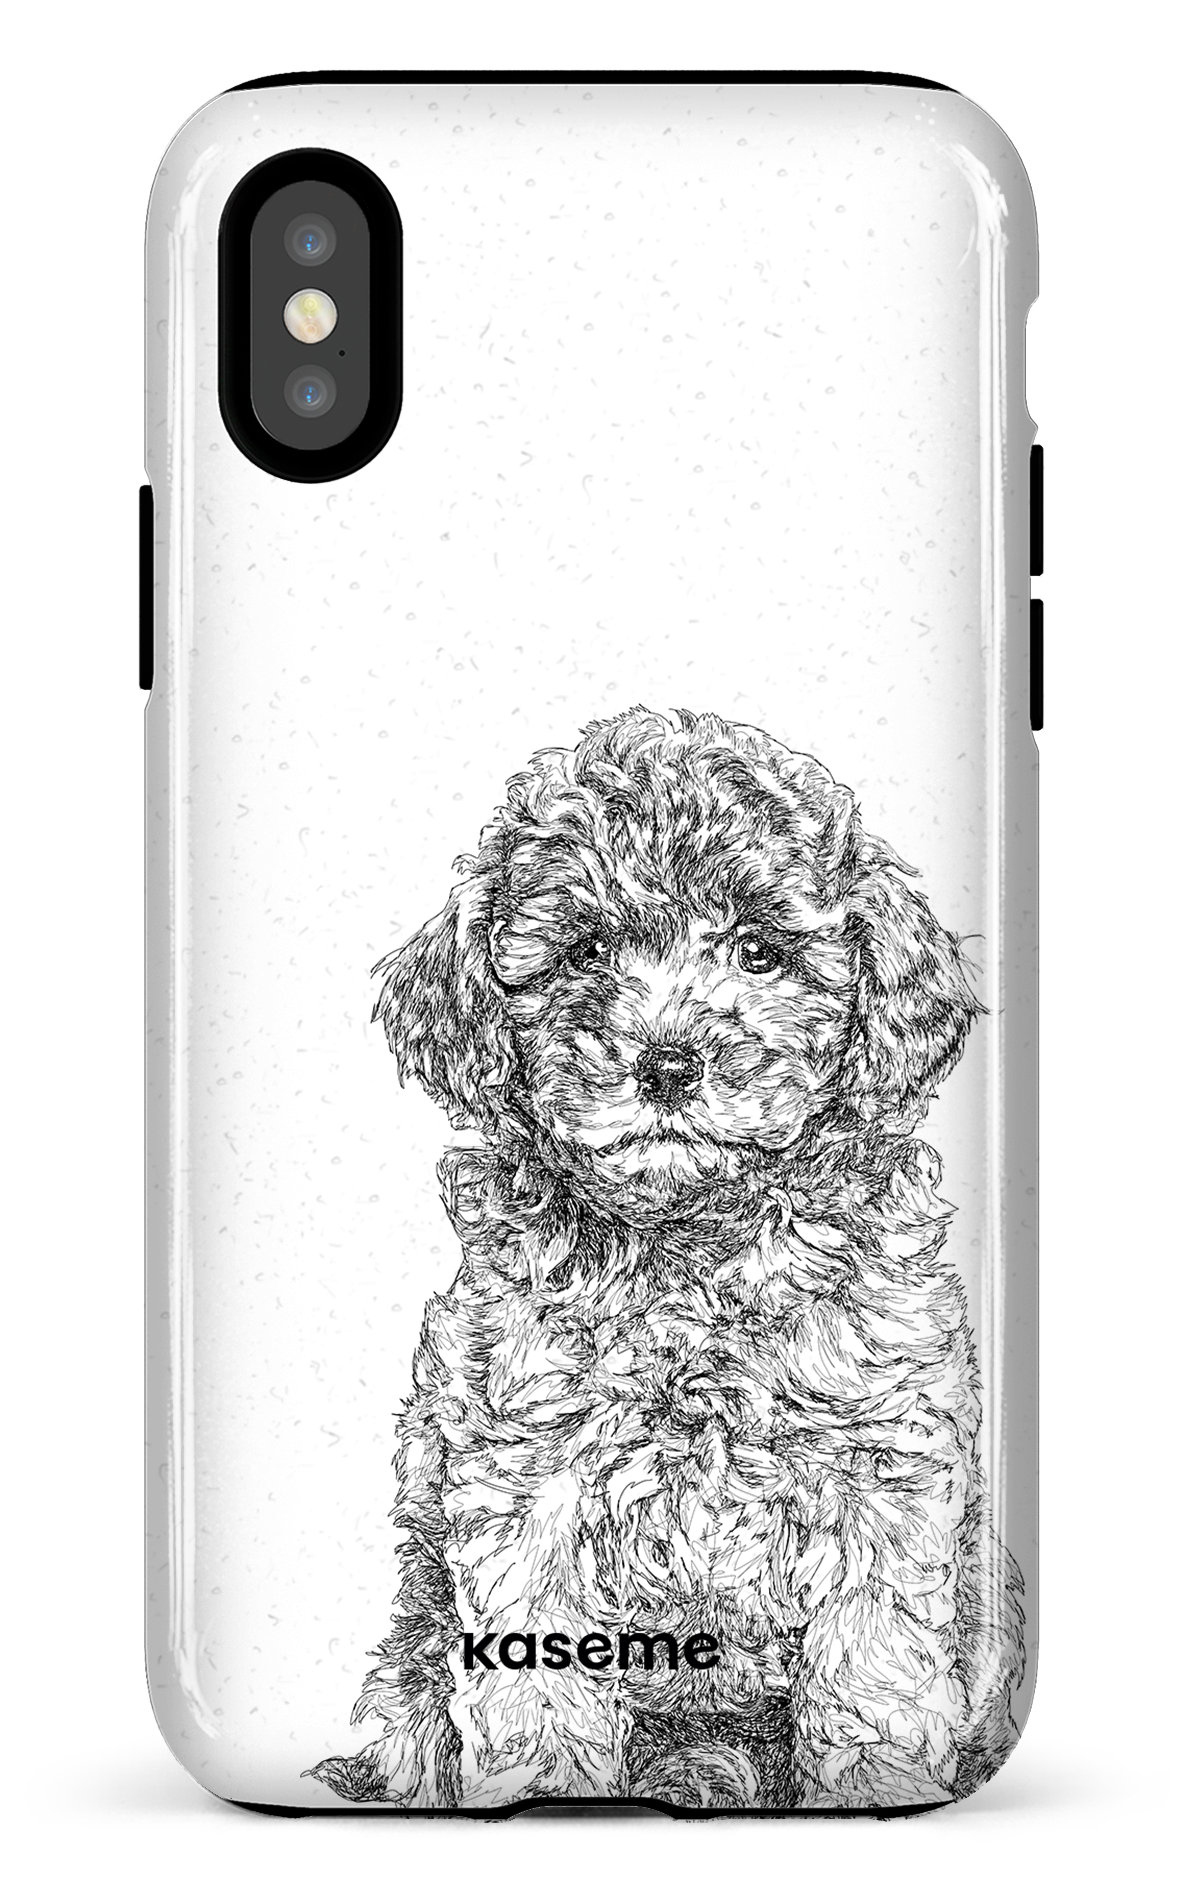 Toy Poodle - iPhone X/Xs